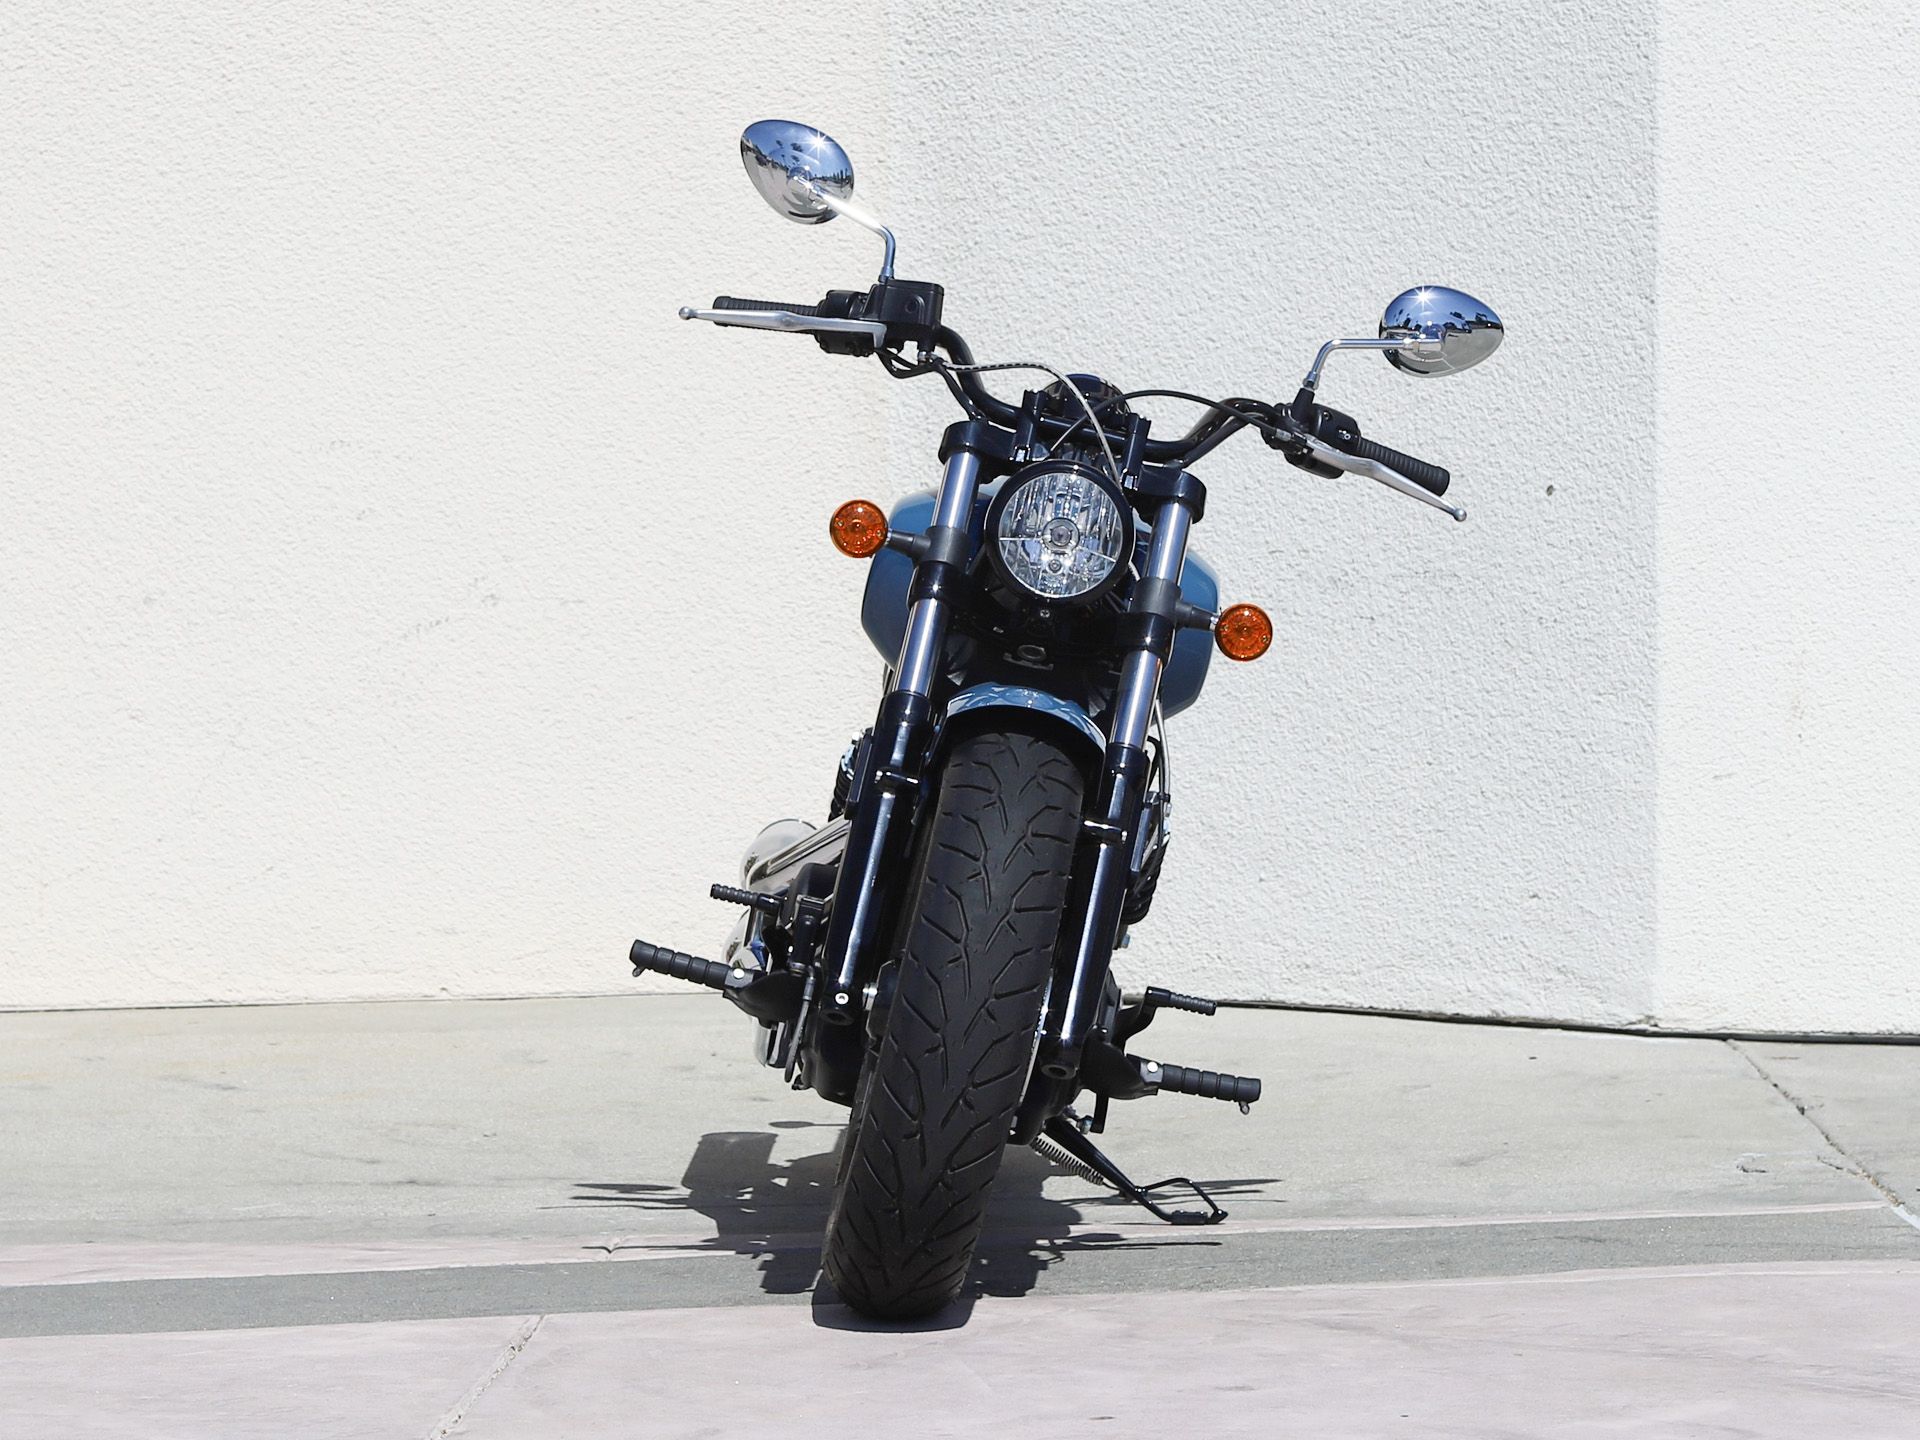 2022 Indian Motorcycle Scout® Sixty ABS in EL Cajon, California - Photo 3